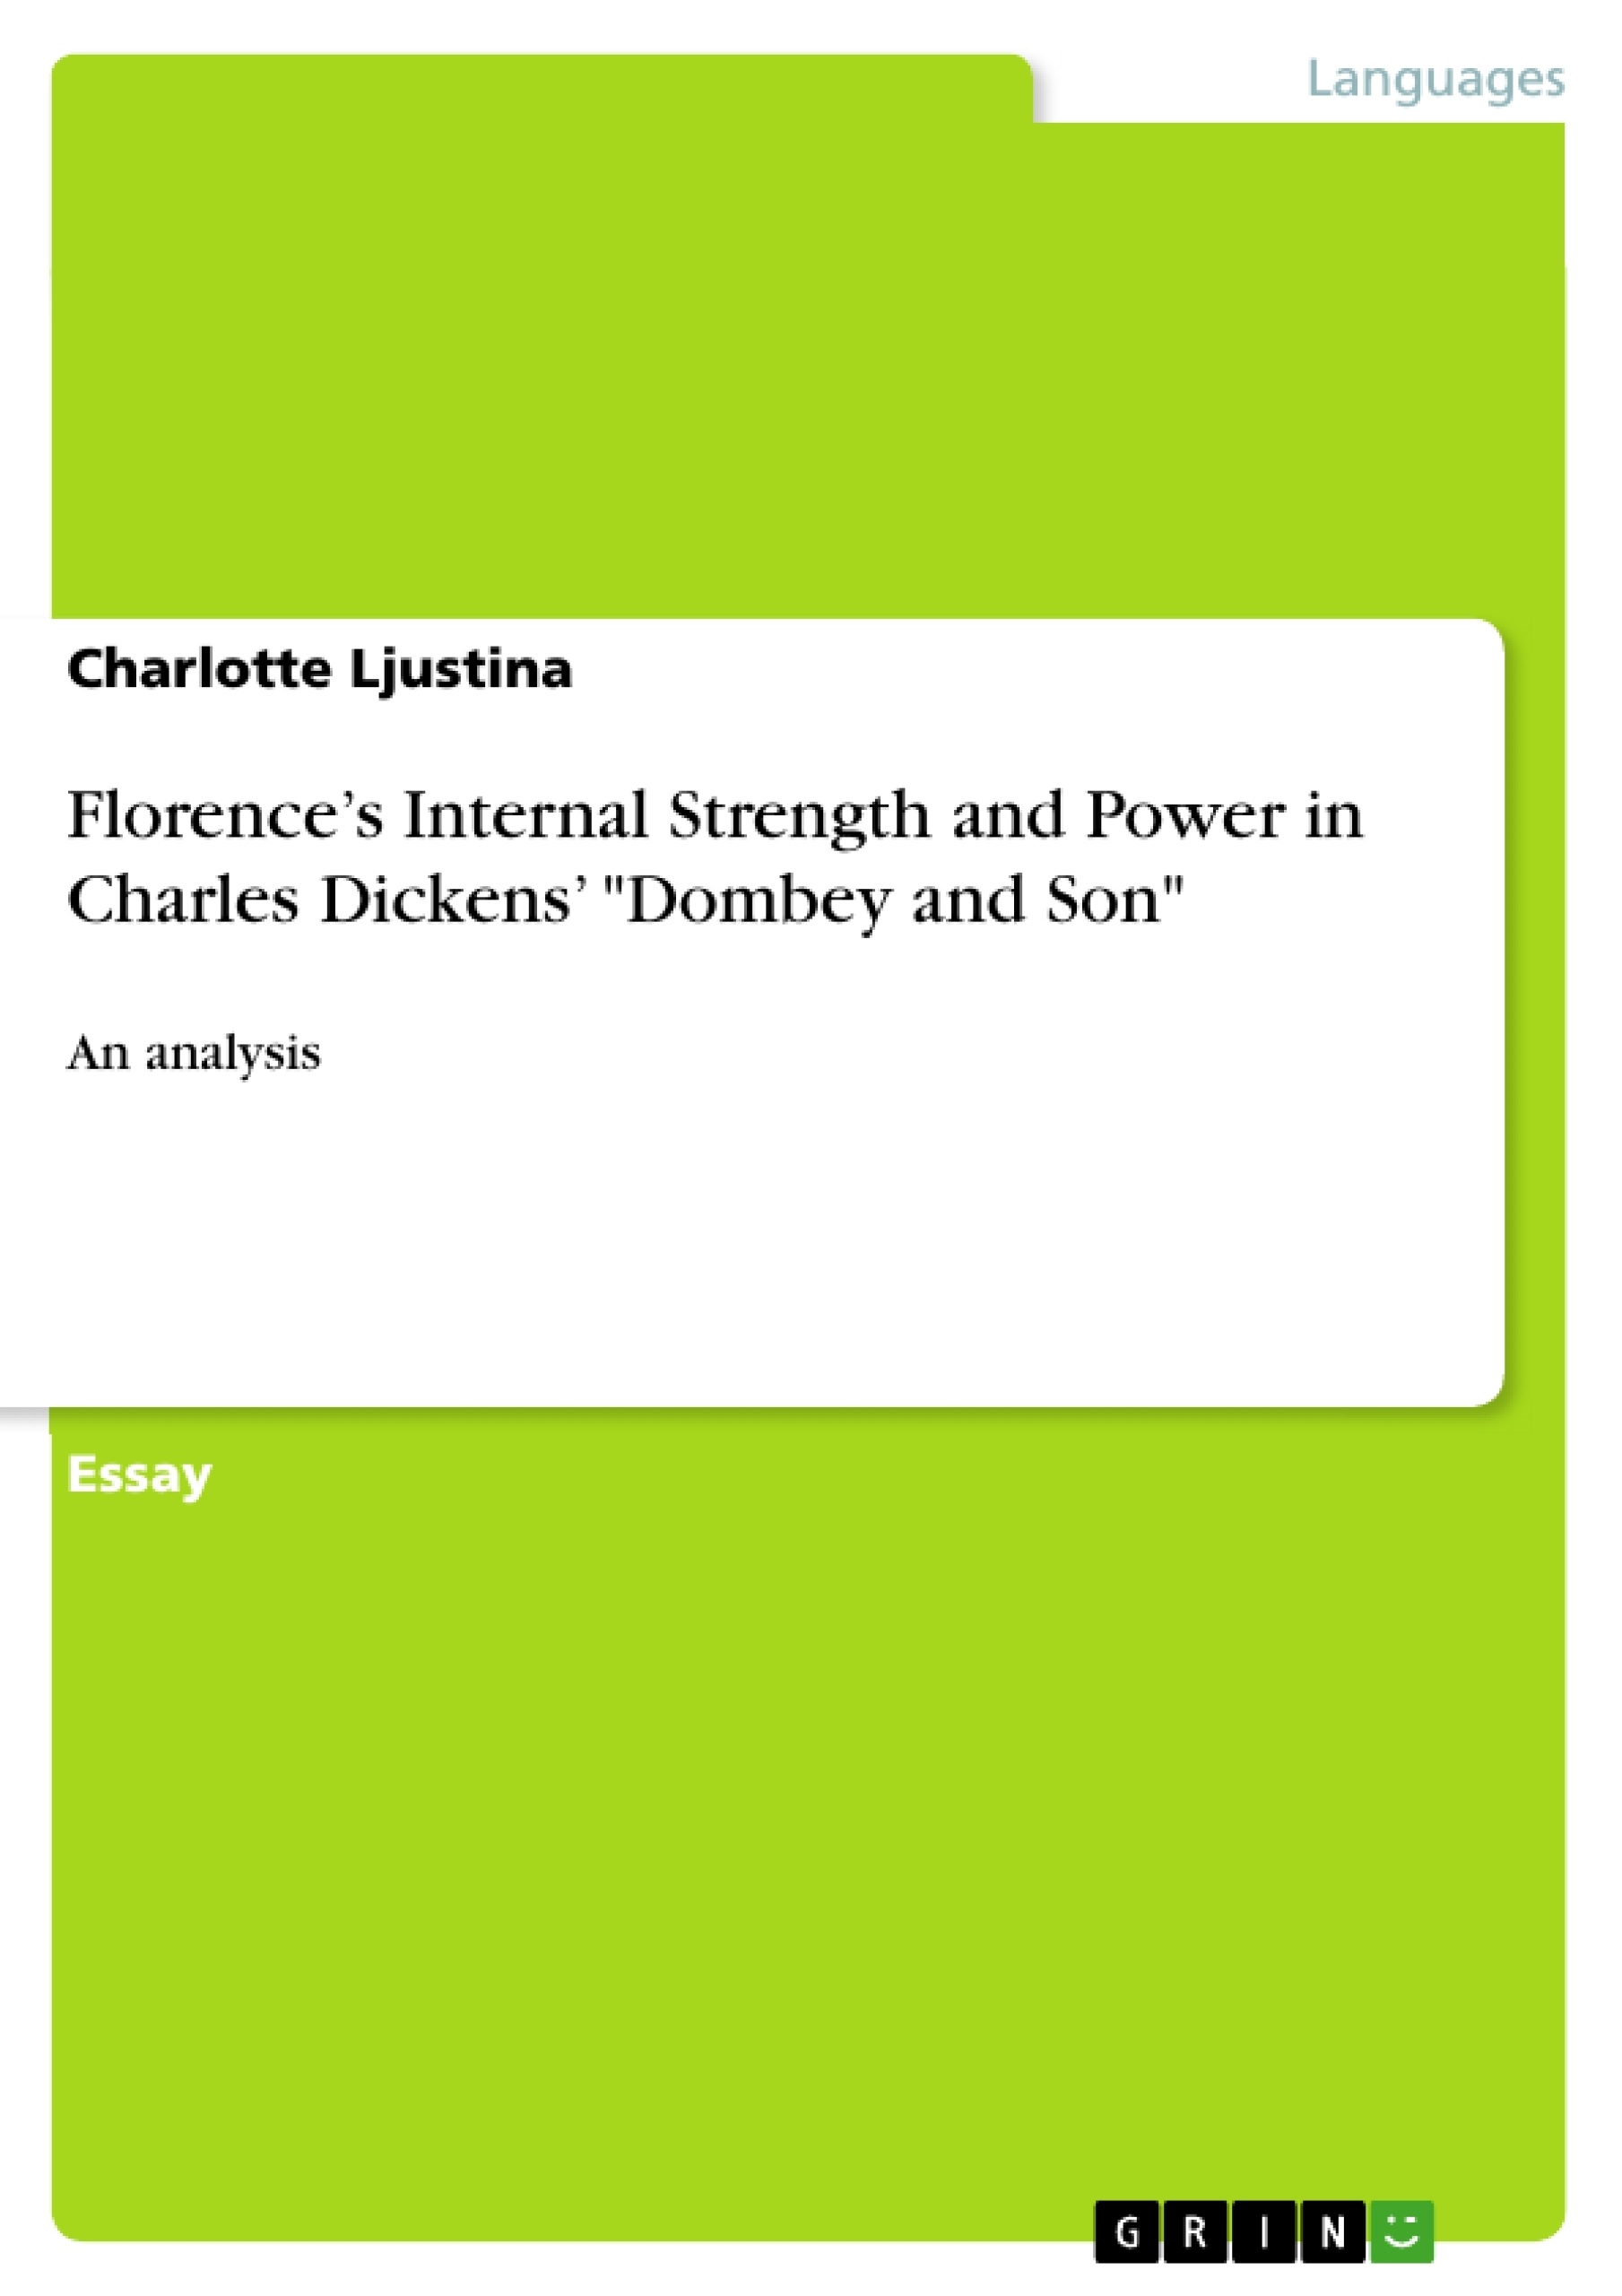 Title: Florence’s Internal Strength and Power in Charles Dickens’ "Dombey and Son"